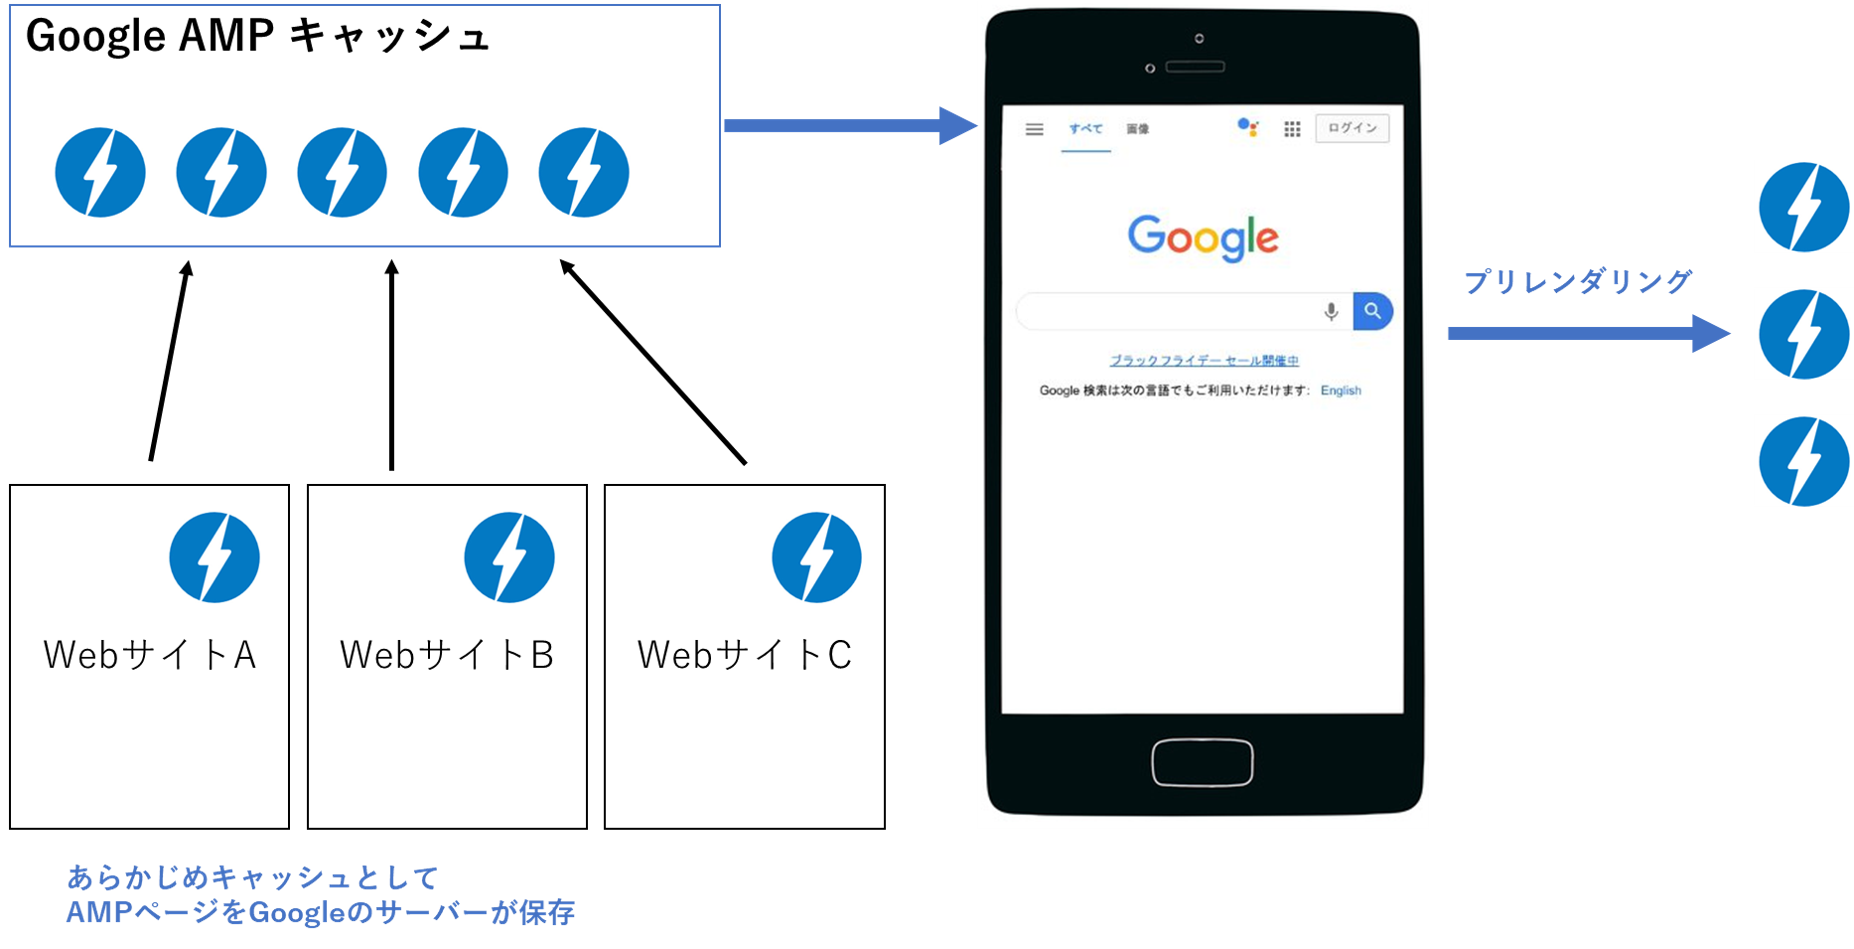 AMP（アンプ・Accelerated Mobile Pages）とは？アンプ化によるSEO効果 ...